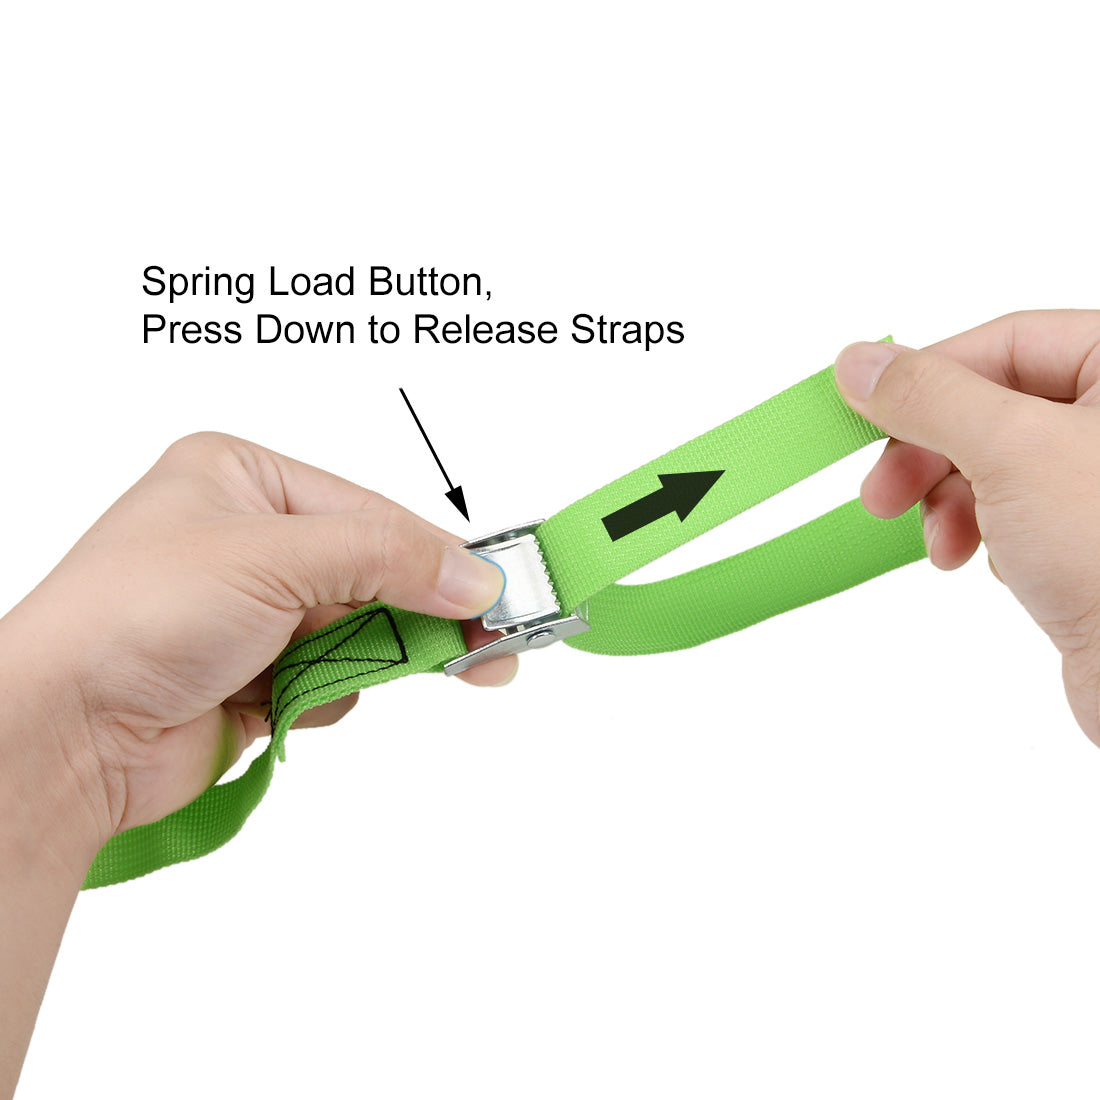 uxcell Uxcell Lashing Strap 1" x 3.3' Cargo Tie Down Straps with Cam Lock Buckle Up to 551lbs Green 2pcs